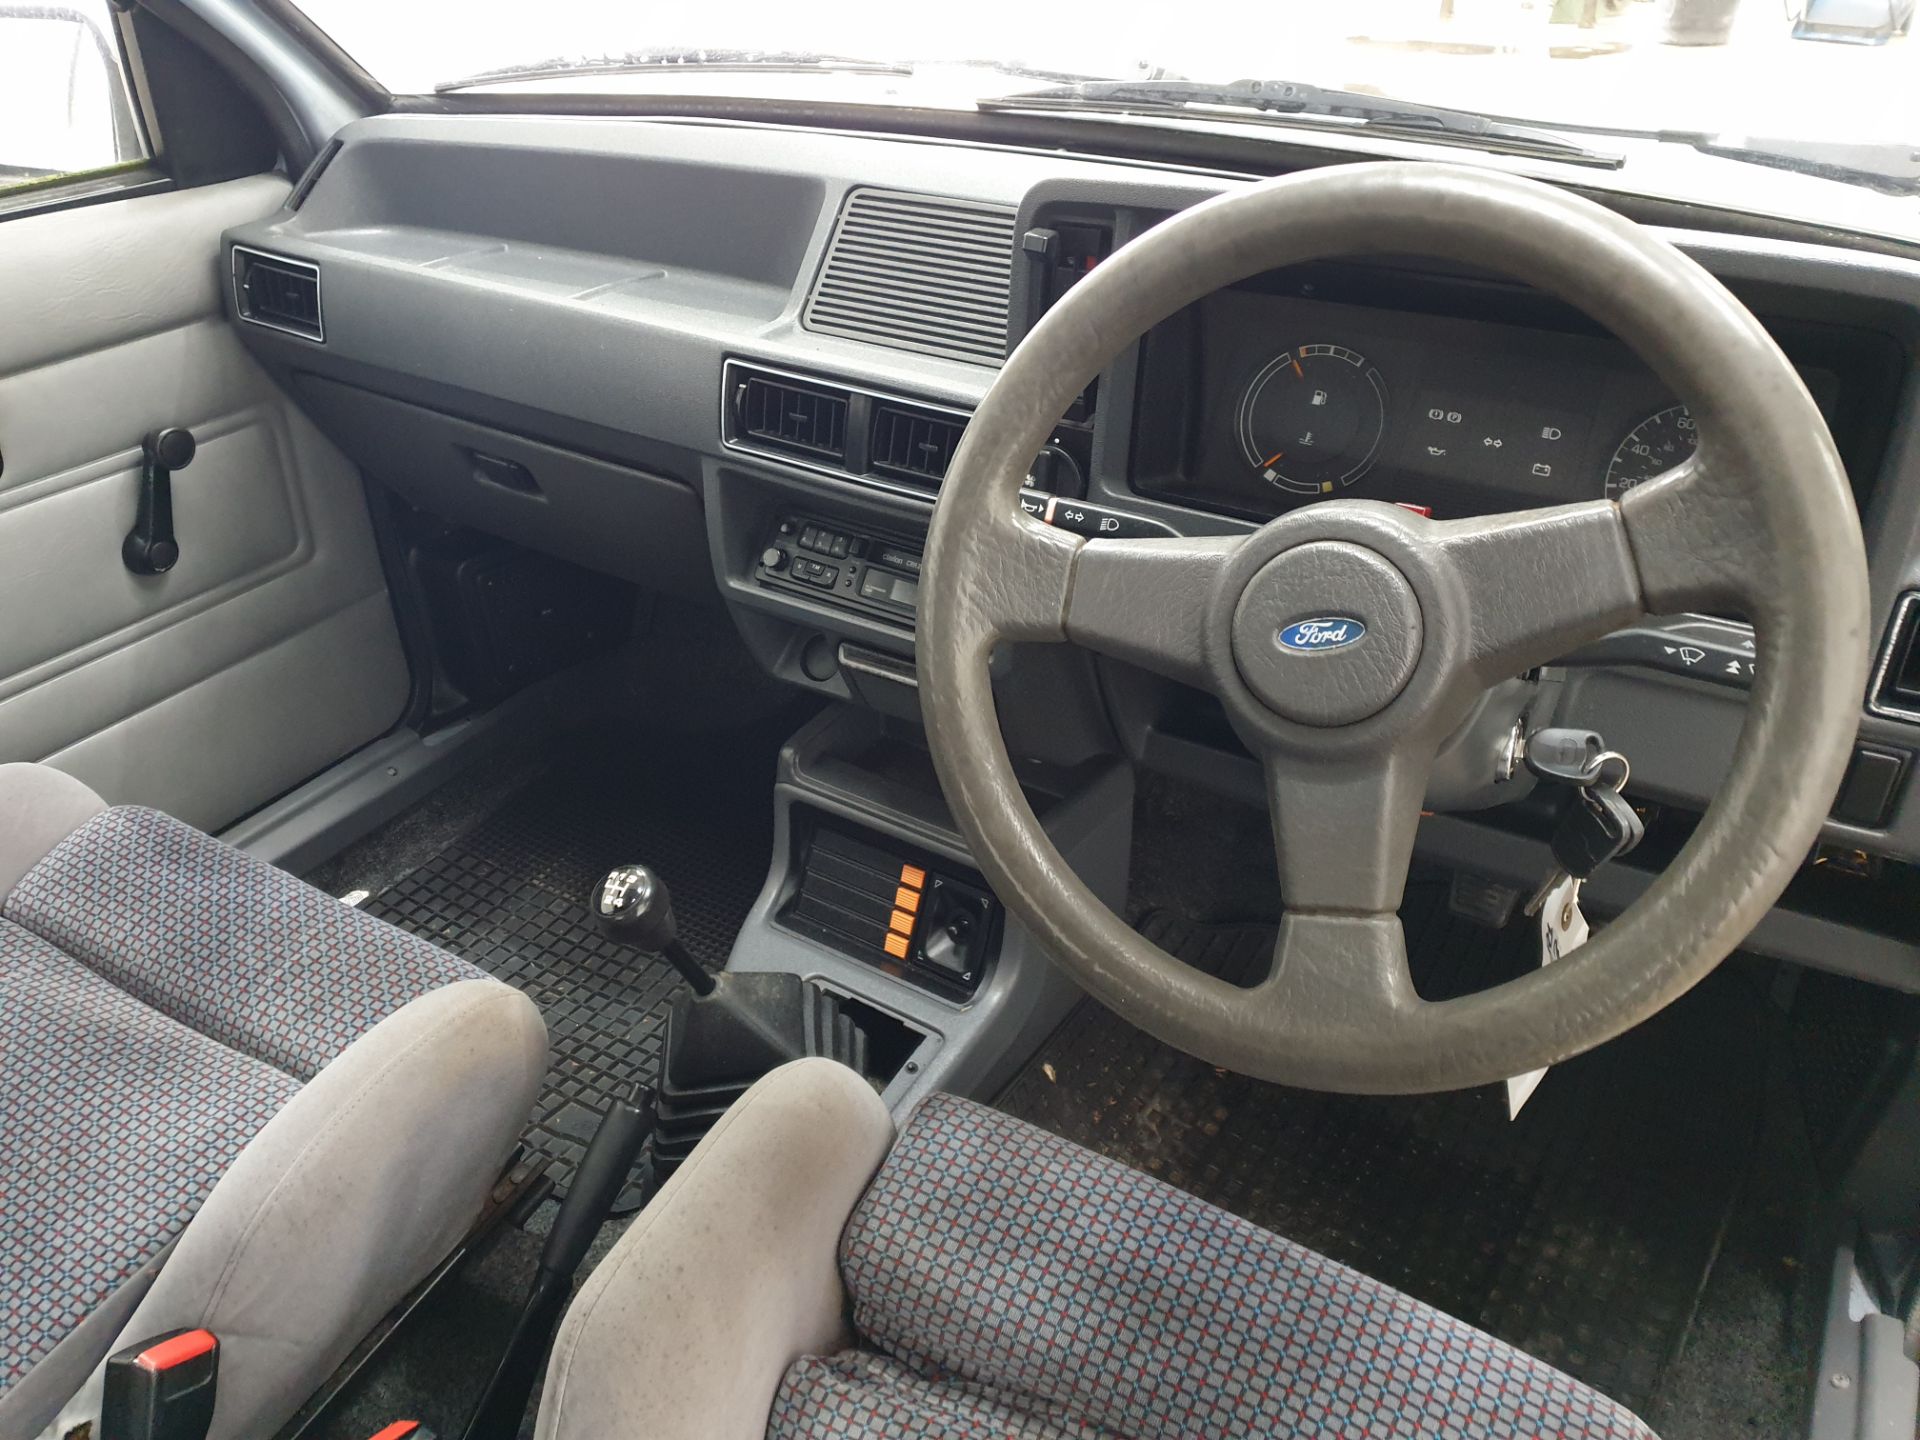 1984 Ford Escort 1100 3dr - Image 11 of 14